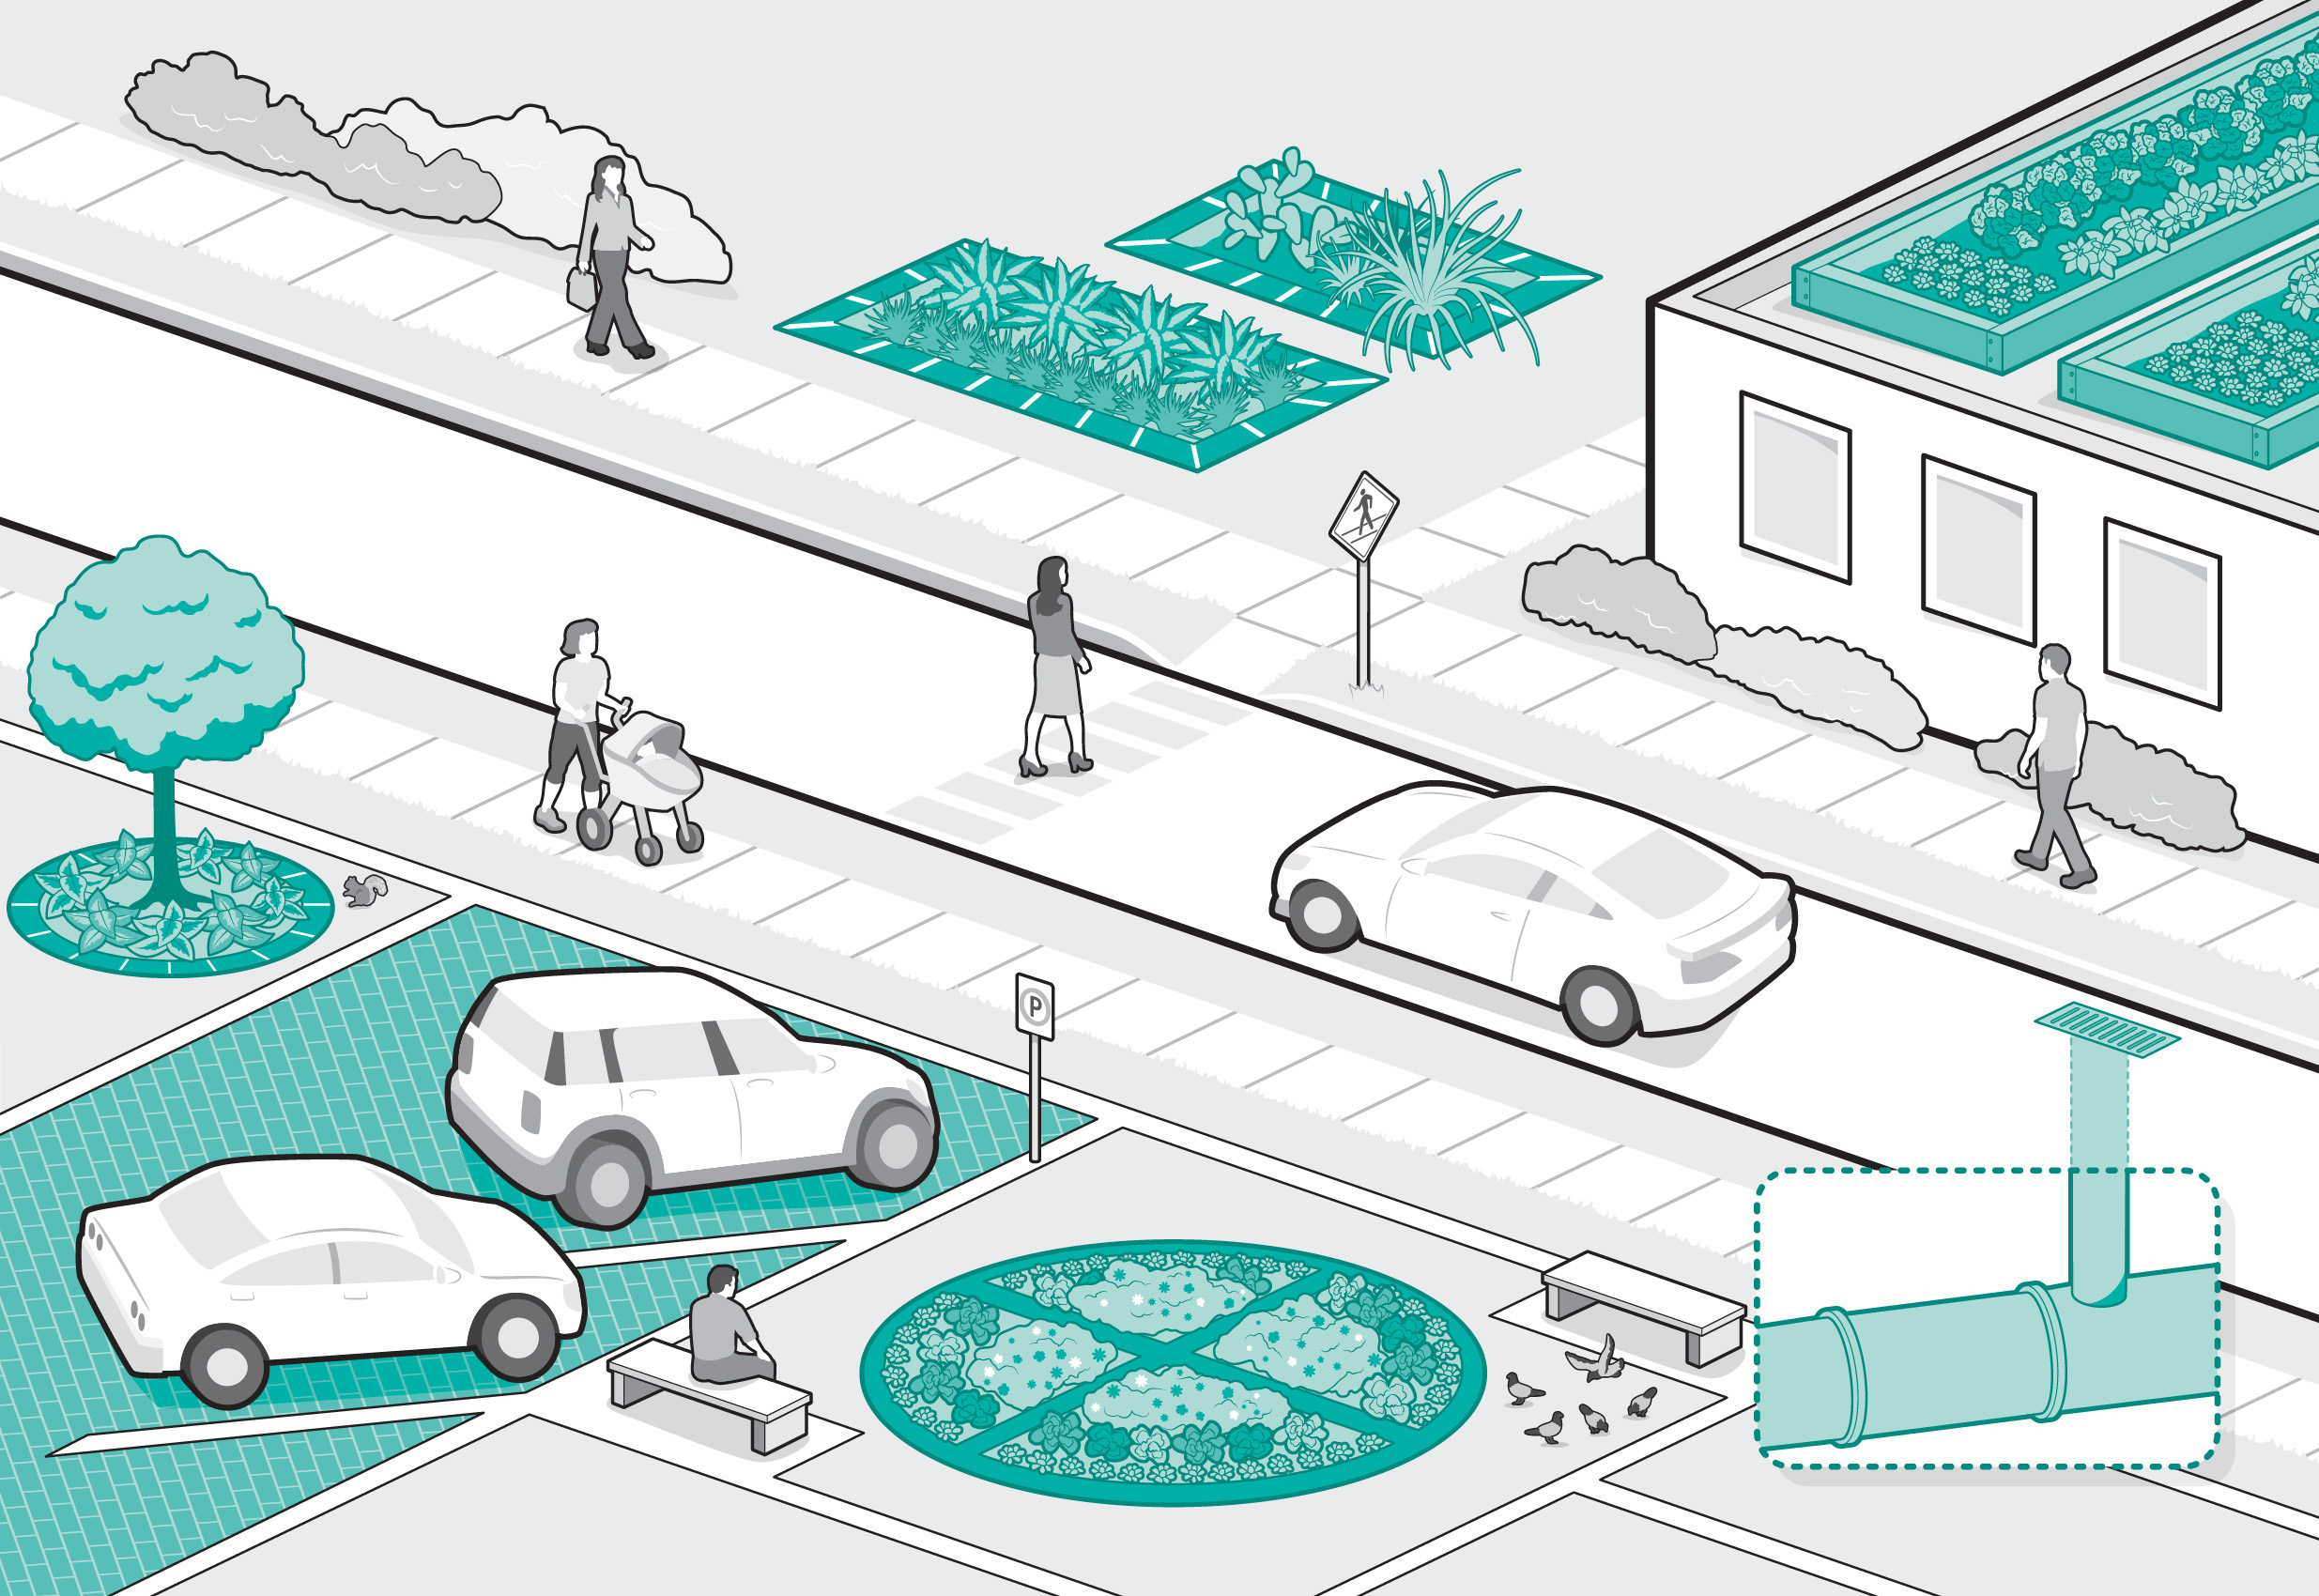 Infographic of stormwater-capturing methods in a city.